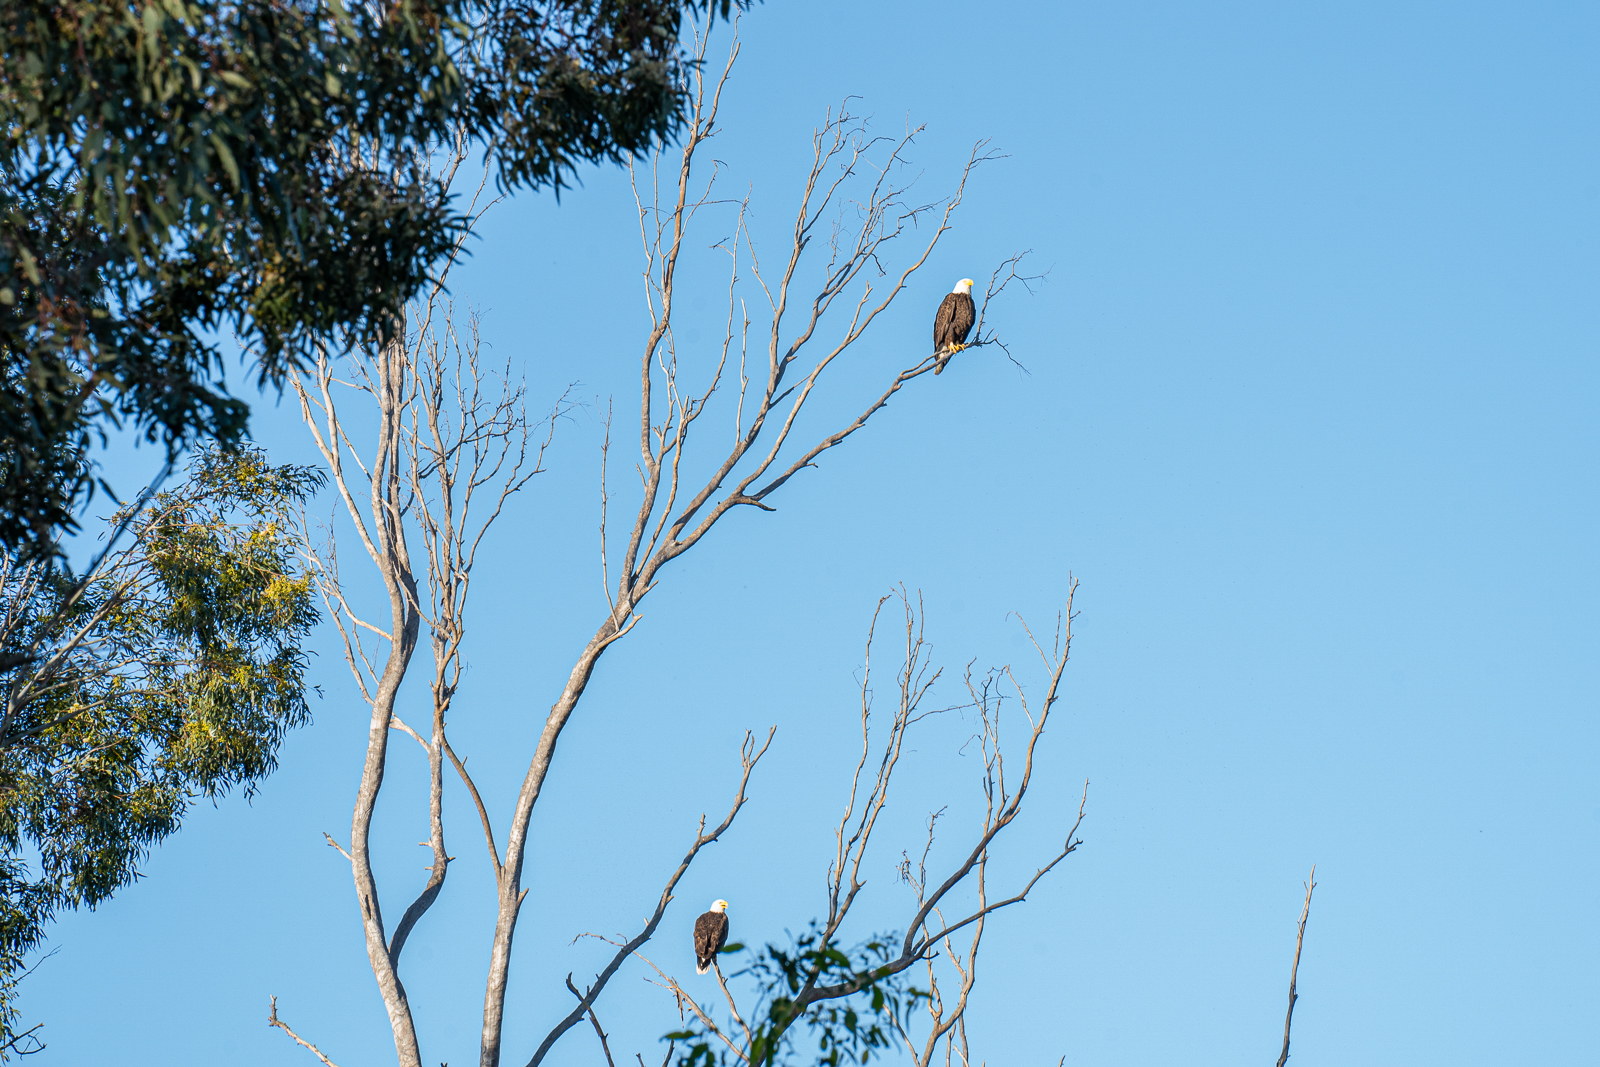 Lucy and Ricky, an eagle pair that has resided at Prado Wetlands for several years, sit in a tree.